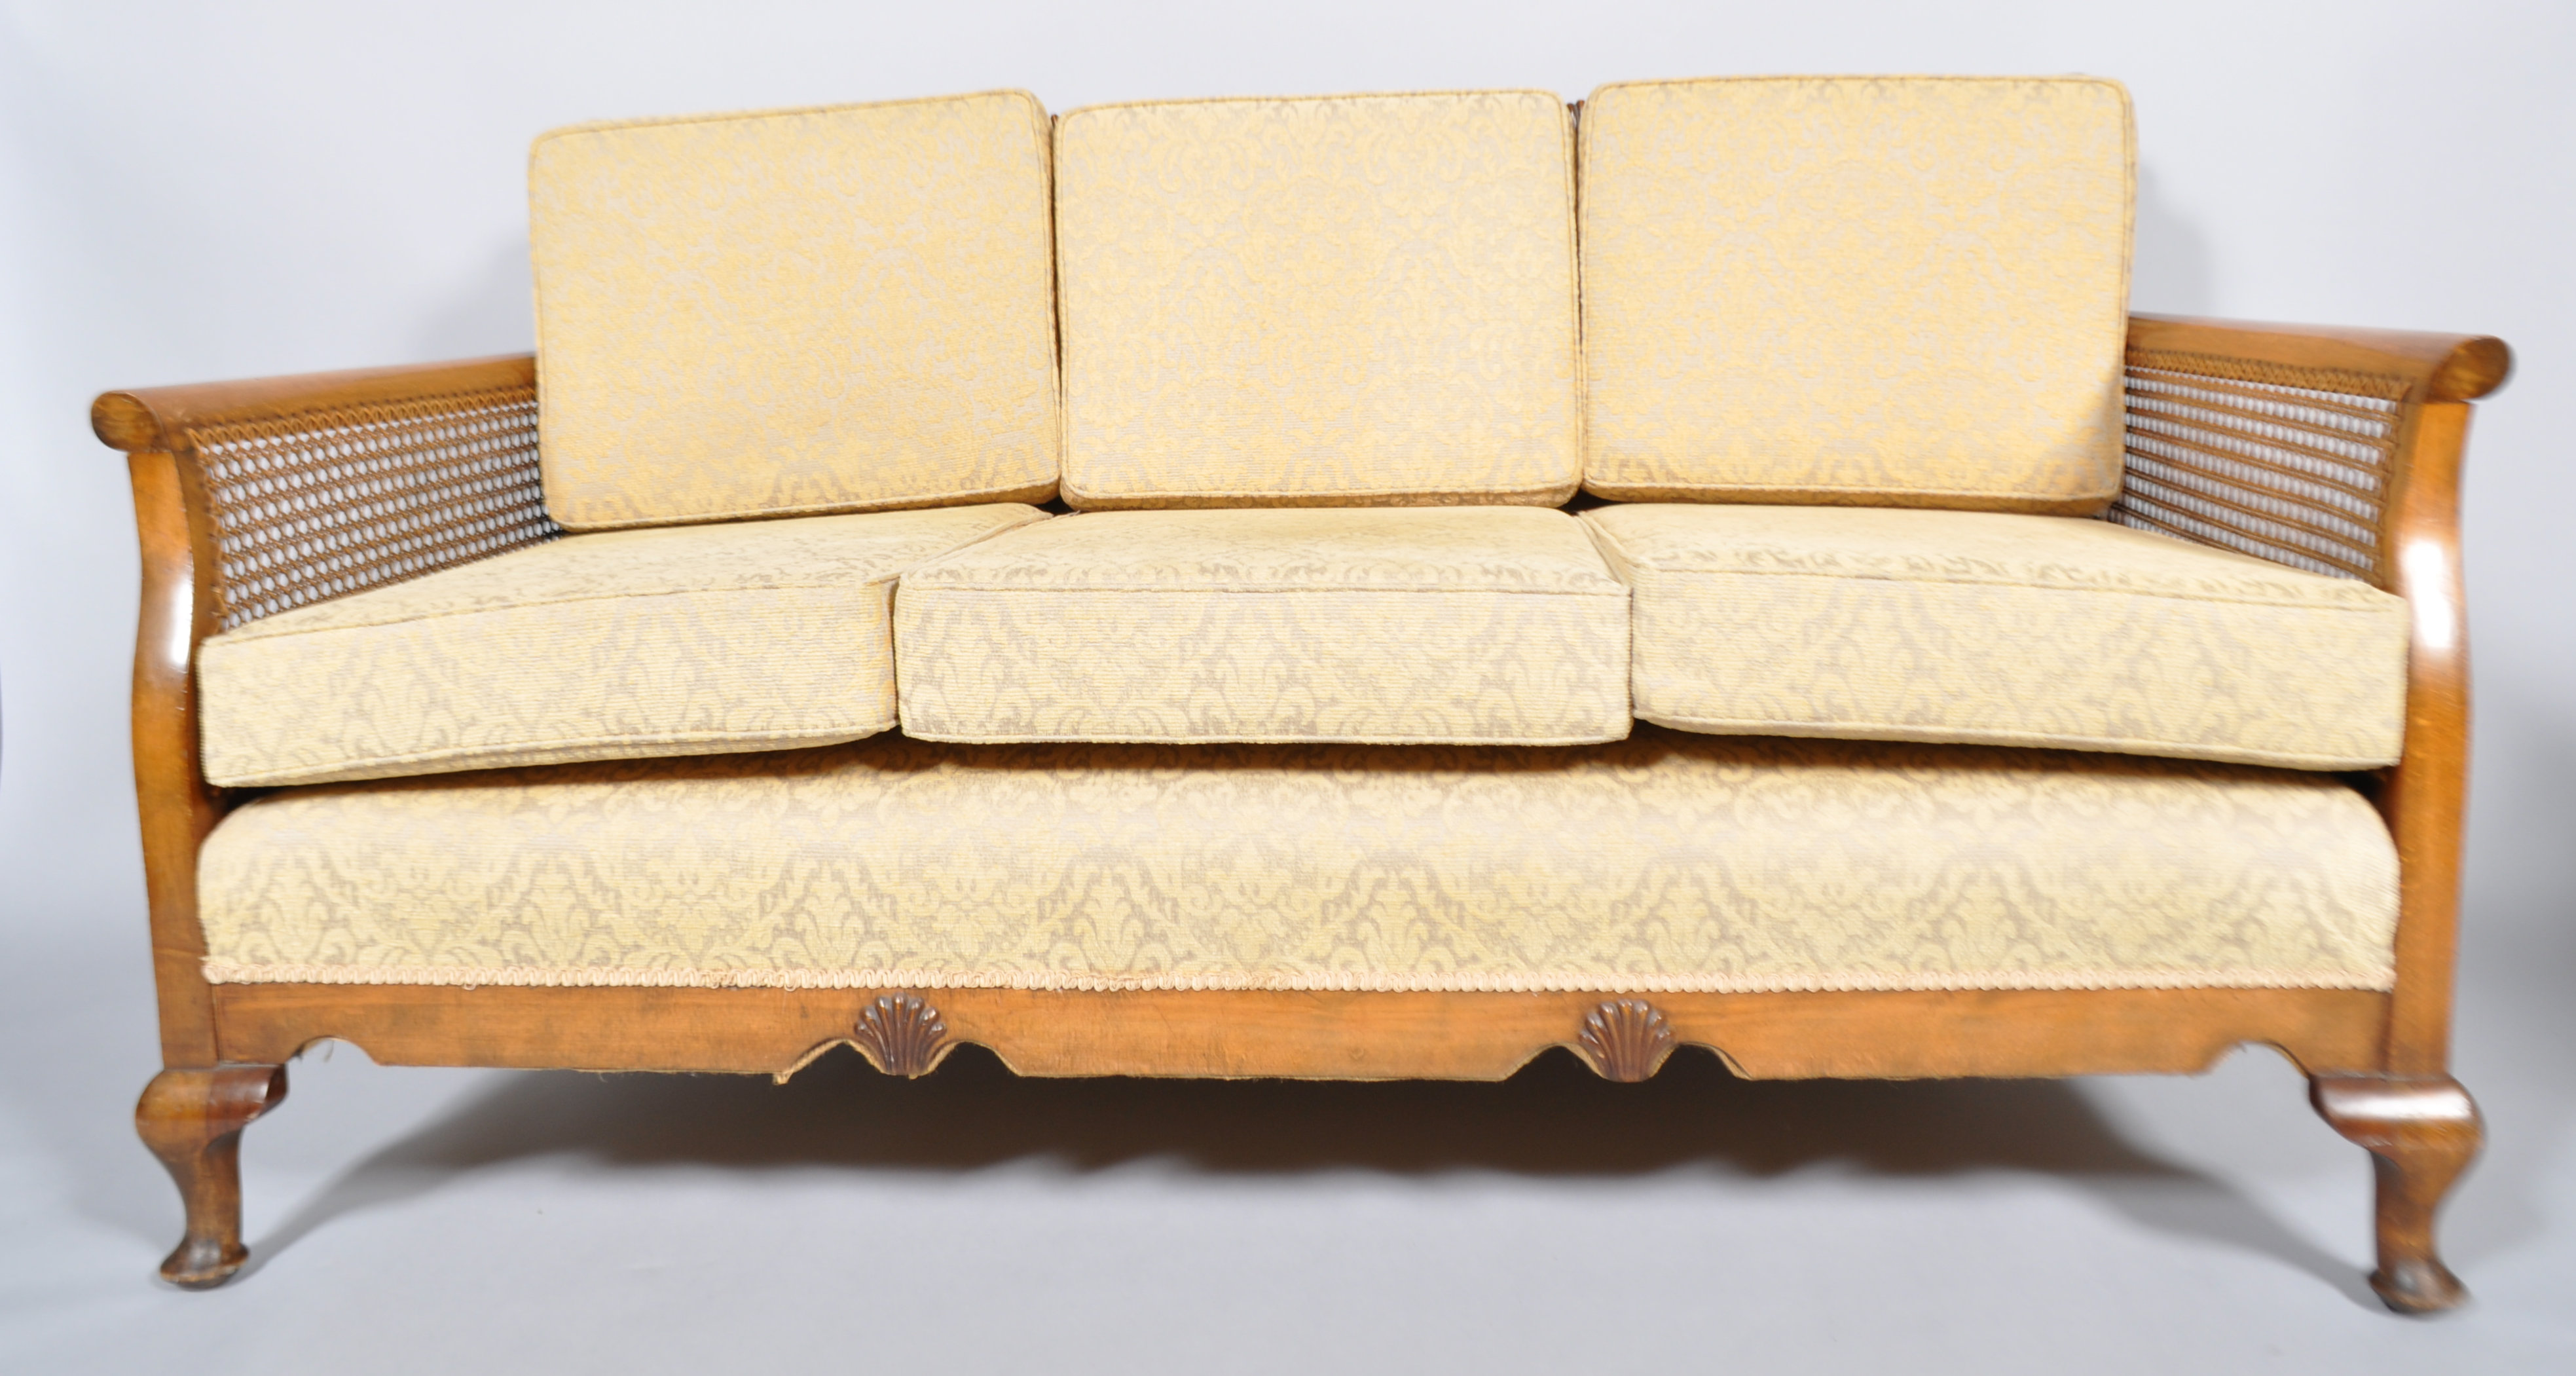 A 1930's art decor walnut and bergere cane work sofa suite - Image 4 of 5